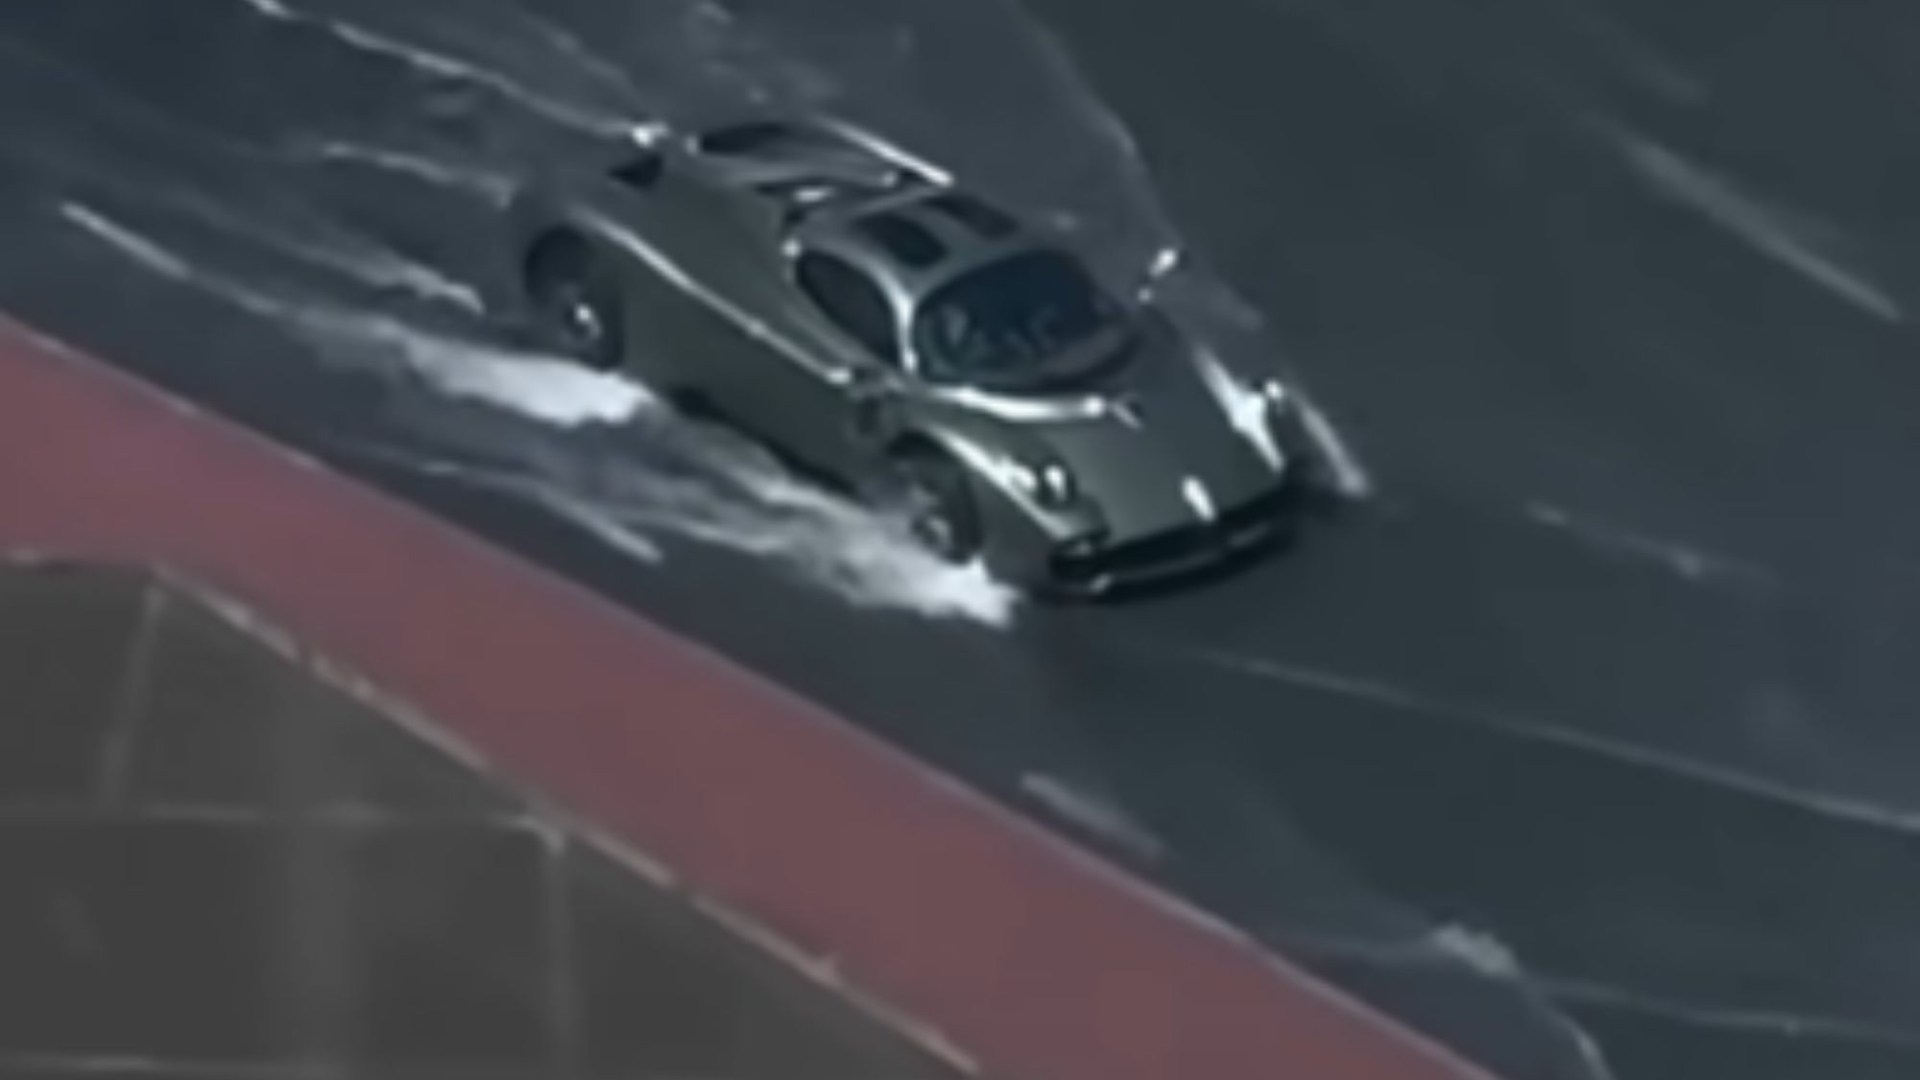 Watch moment incredibly rare 2million hypercar ploughs through Dubai floods with roads completely submerged [Video]